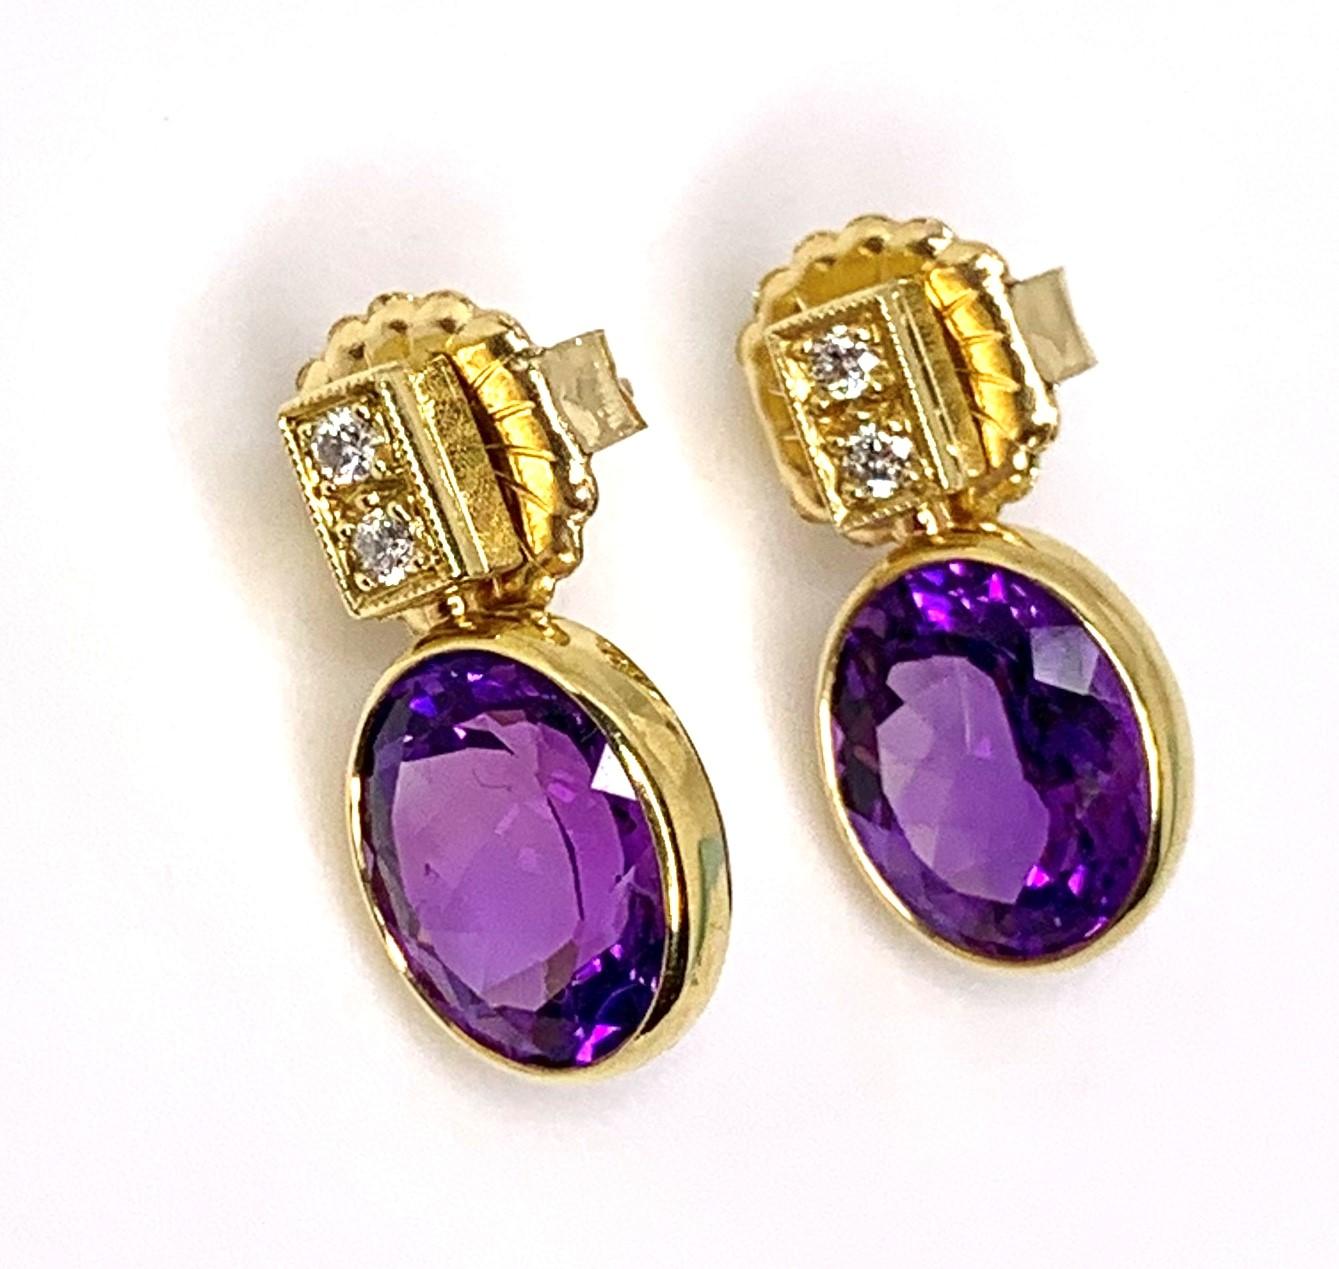 Women's Amethyst and Diamond Drop Earrings in 18k Yellow Gold, 6.72 Carats Total For Sale